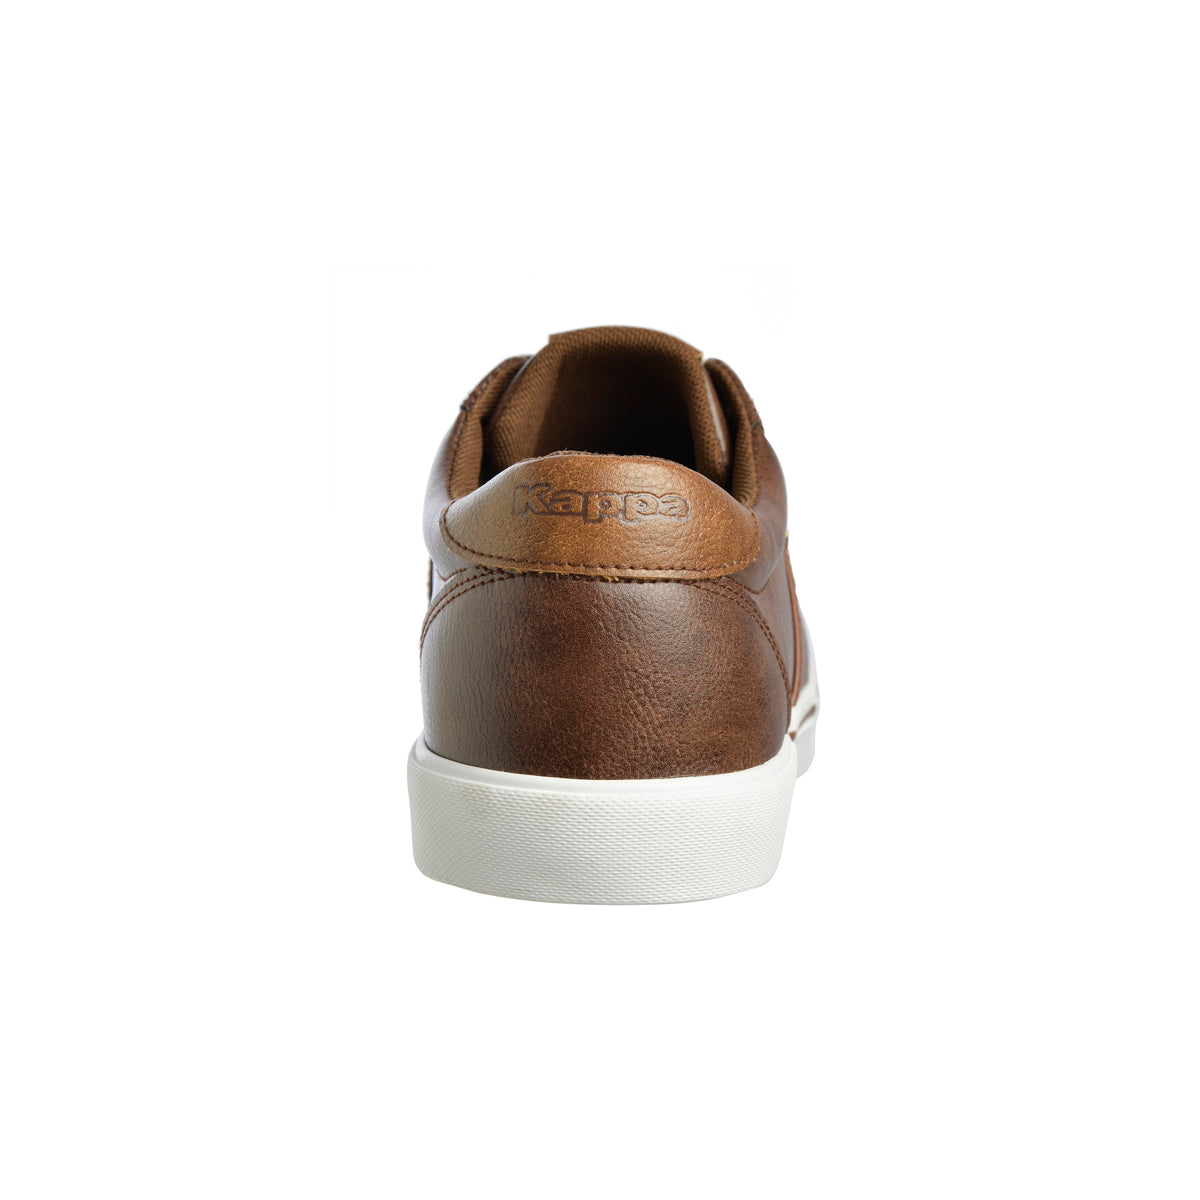 Chaussures lifestyle Chiva Marron homme - image 3